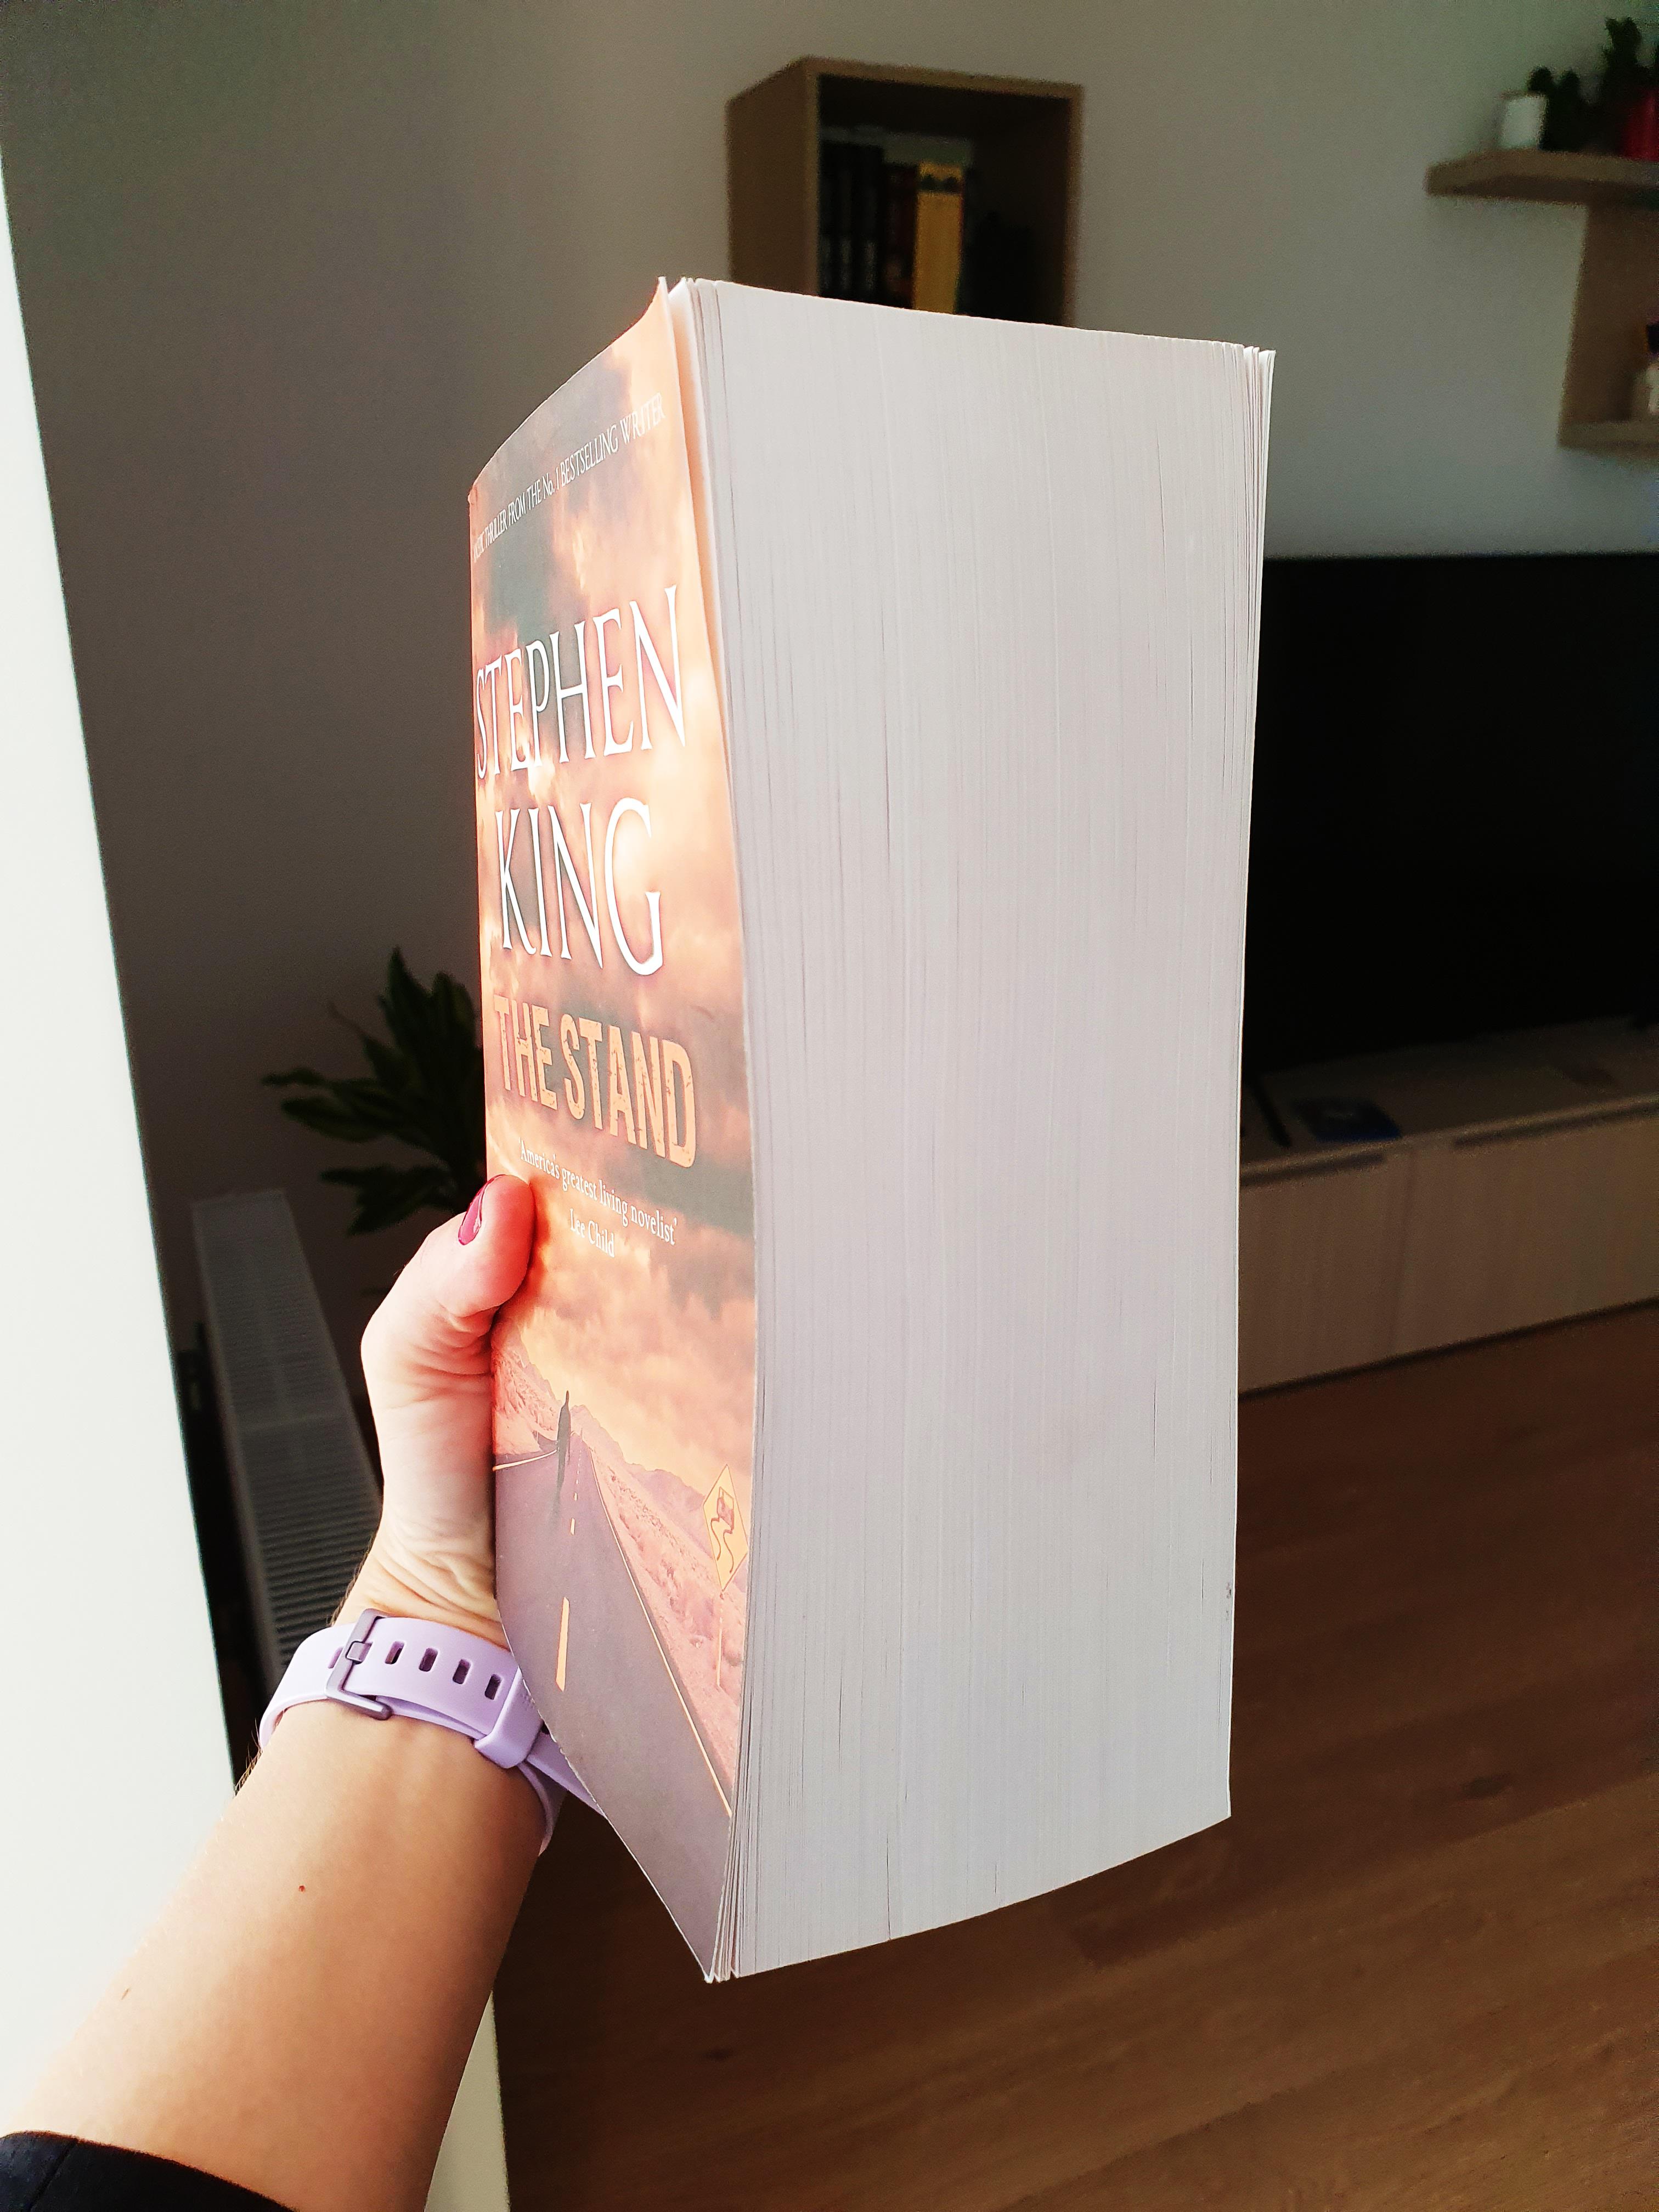 How many pages is Stephen King's longest novel?